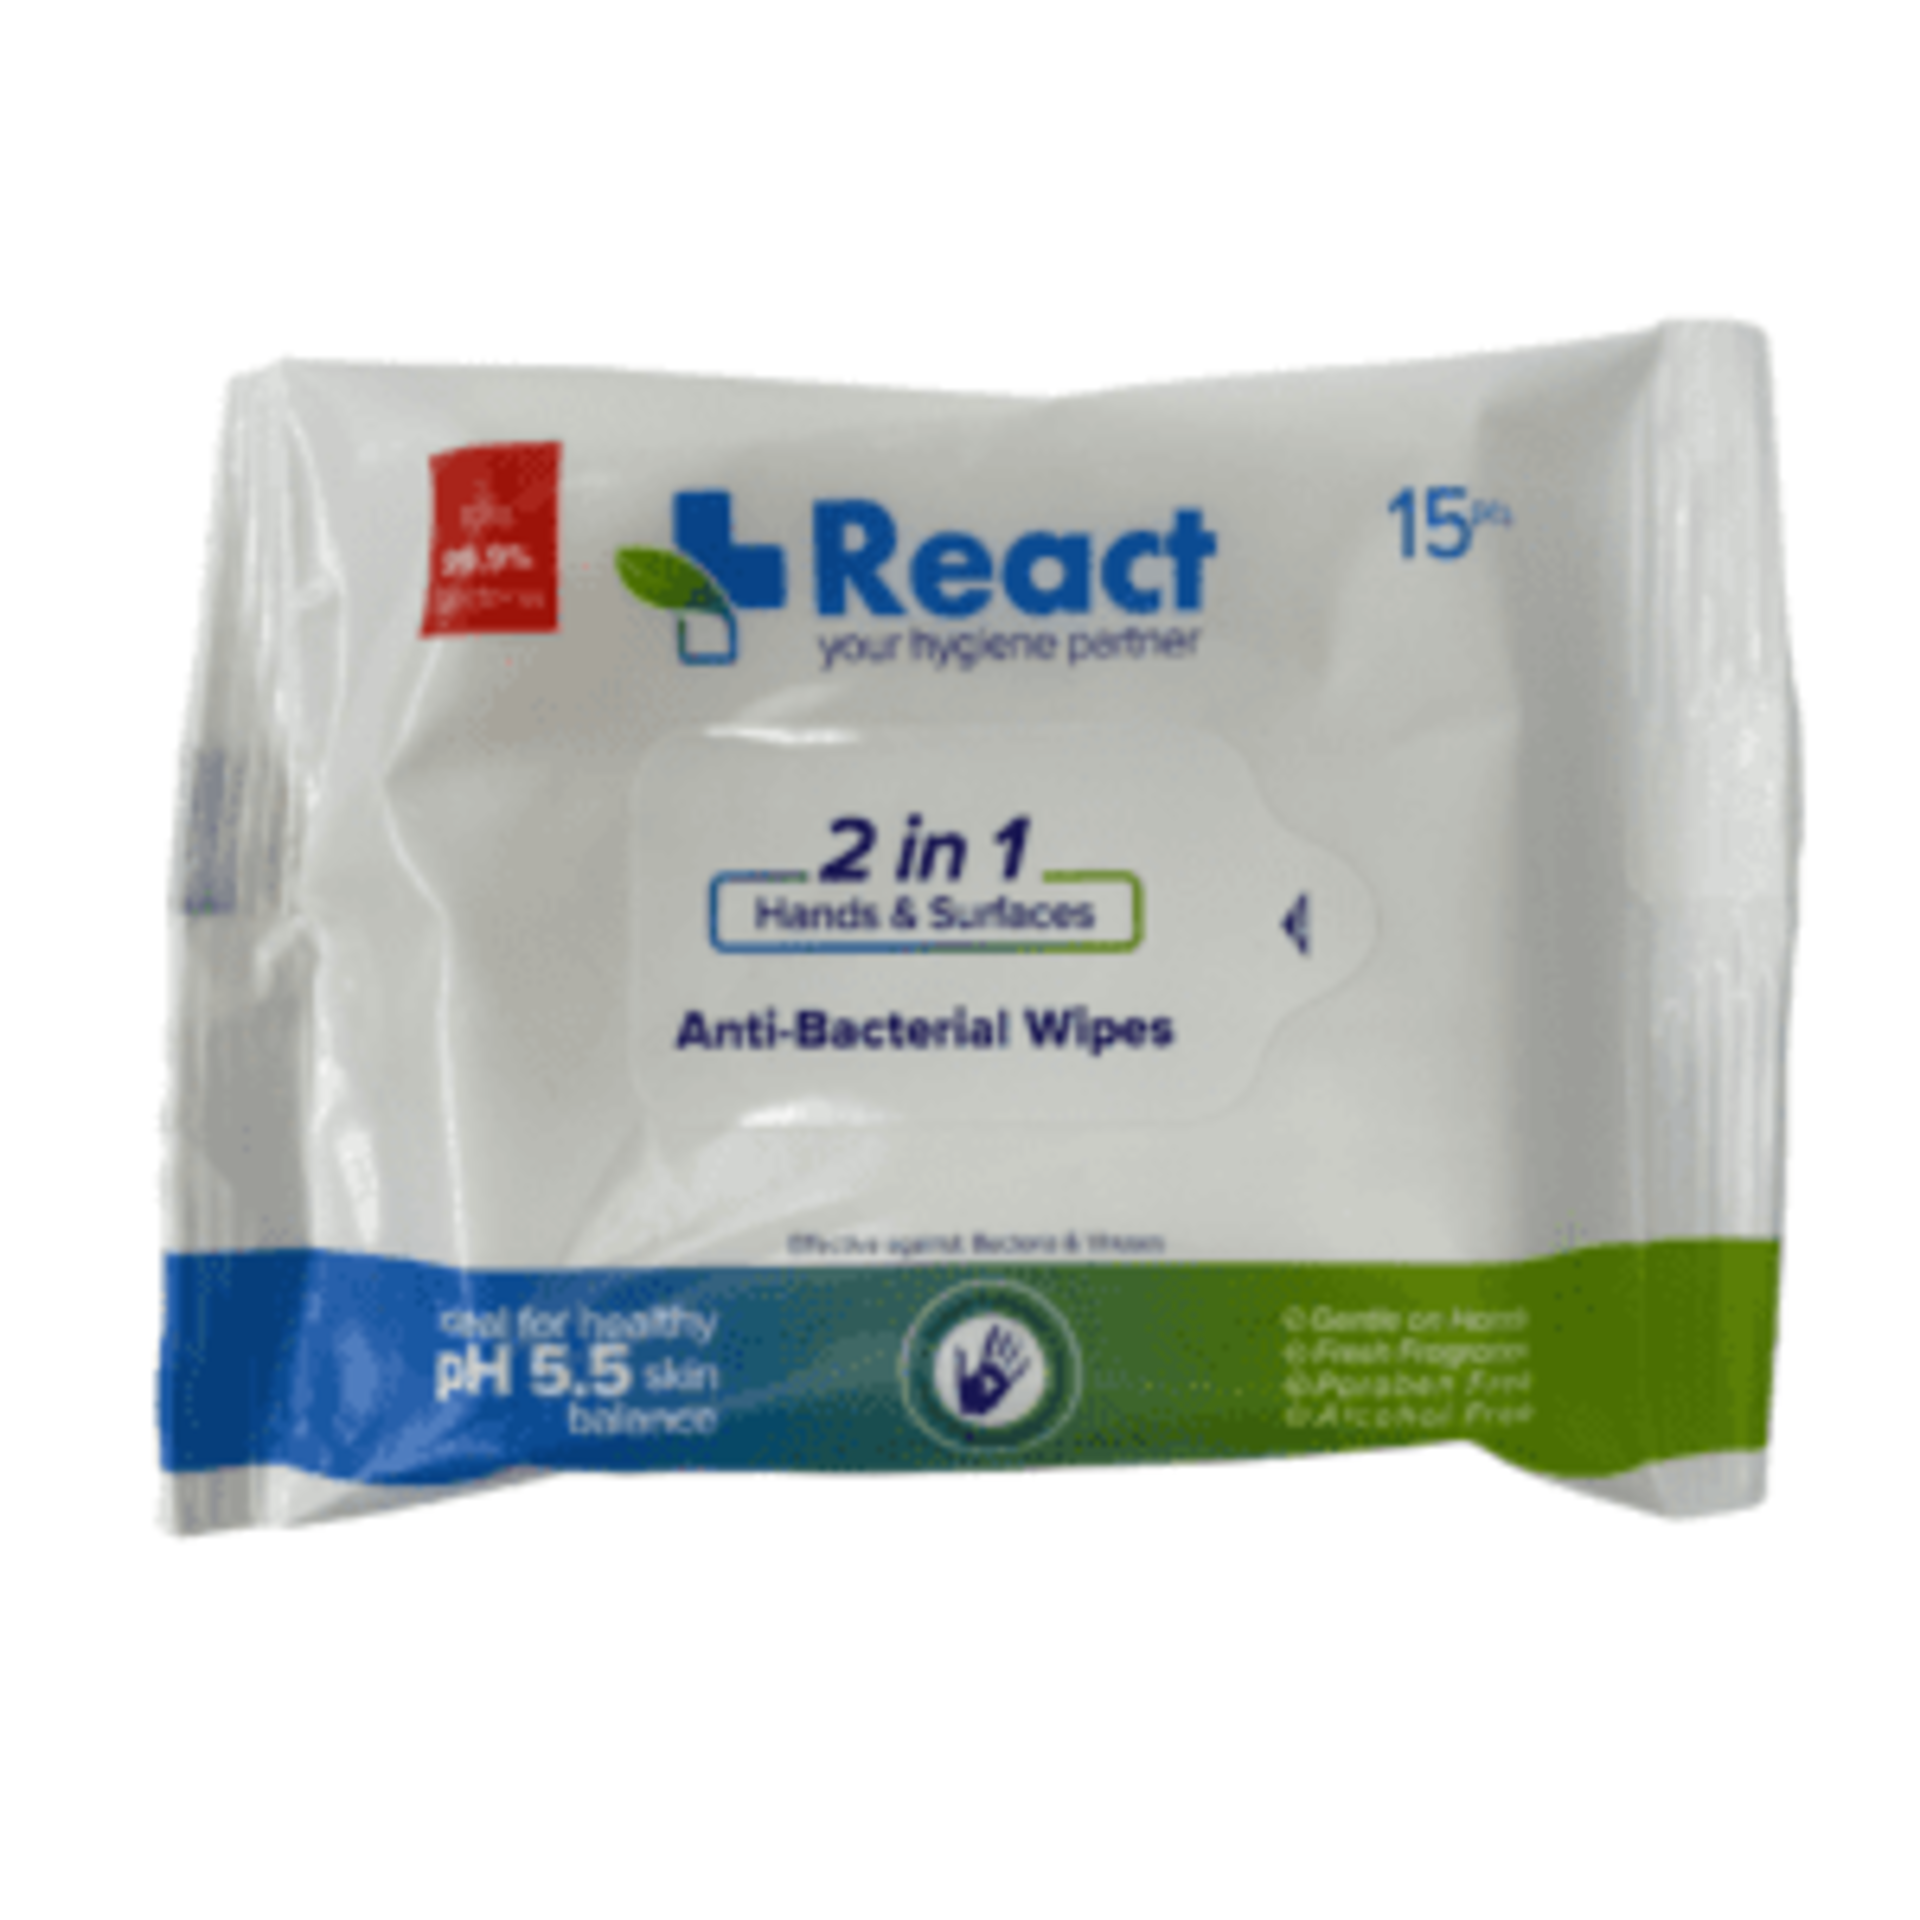 Pallet To Contain 4,200 Packs of 15 React - 2 in 1 Hand & Surfaces Anti-Bacterial Wipes. RRP £1.99 - Image 2 of 2